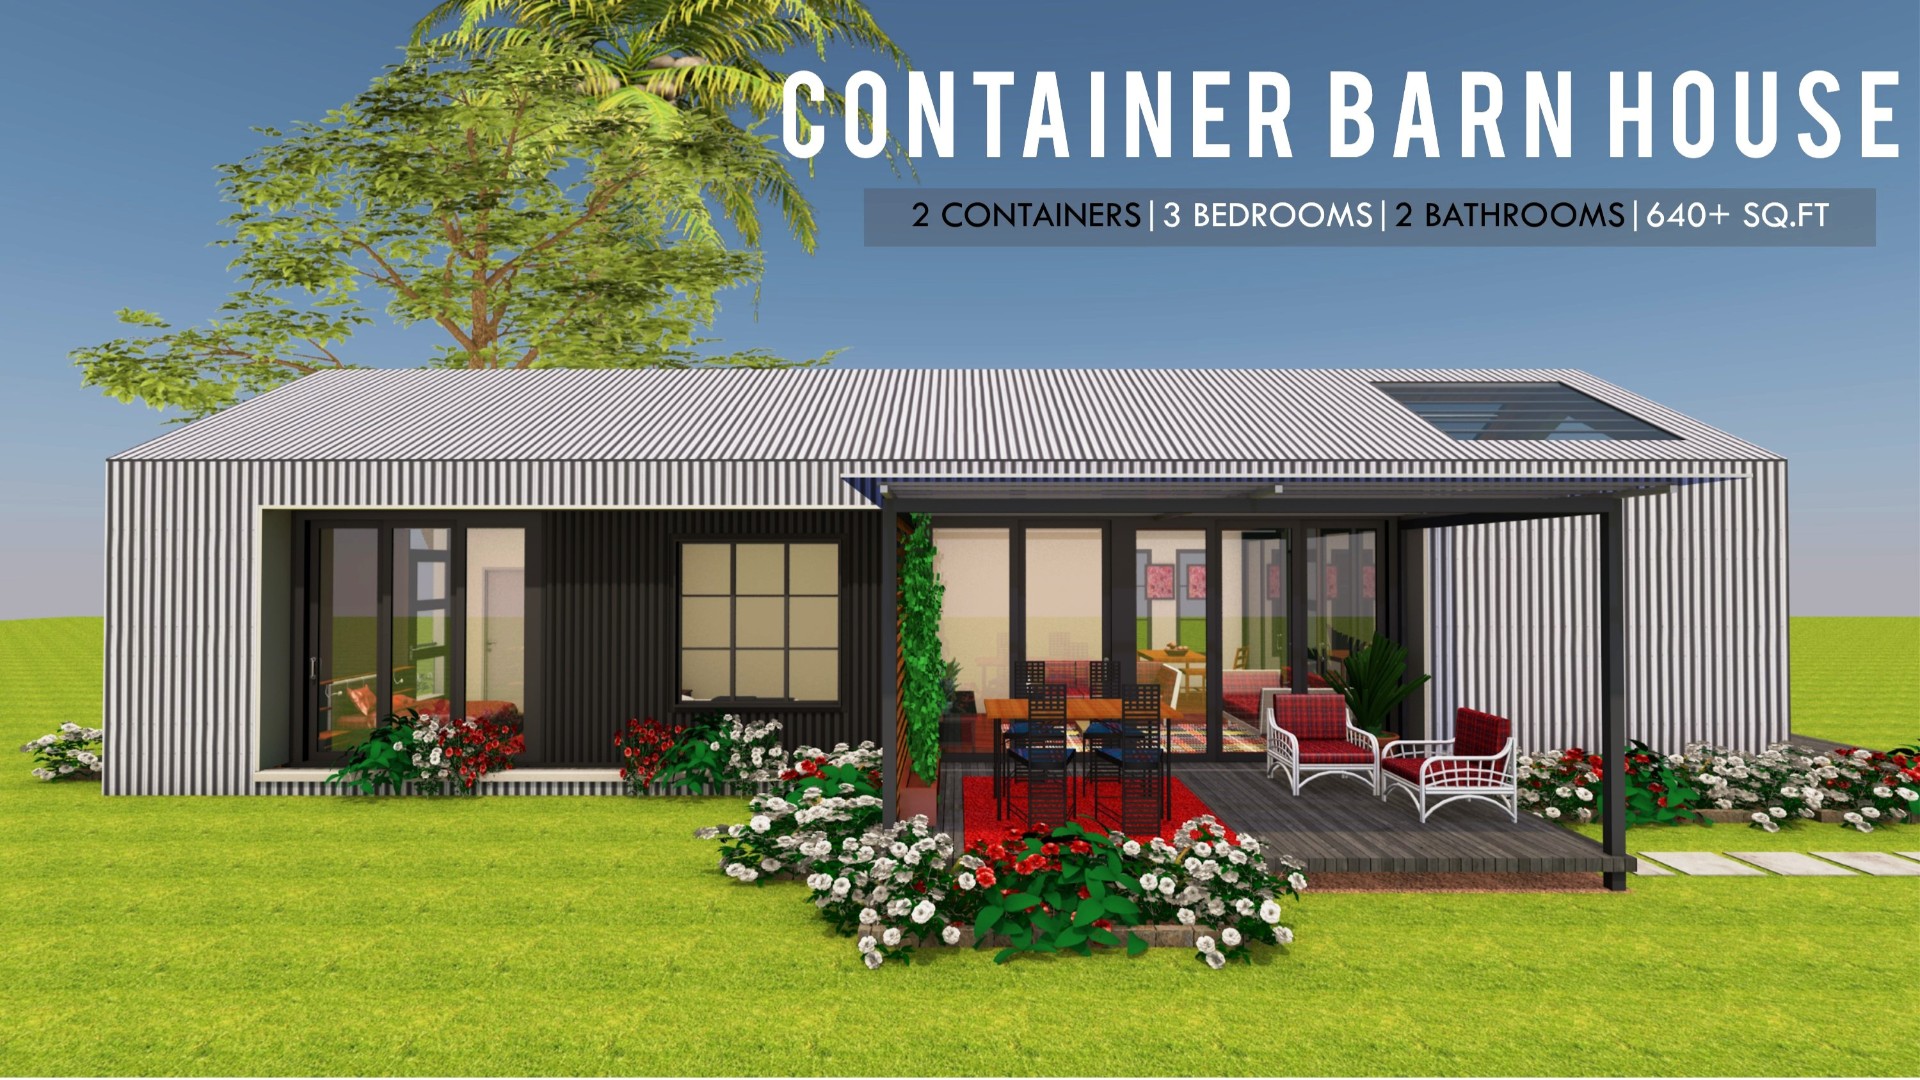 3 Bedroom Prefab Shipping Container Home Design + Floor Plans | TWINBOX 1280